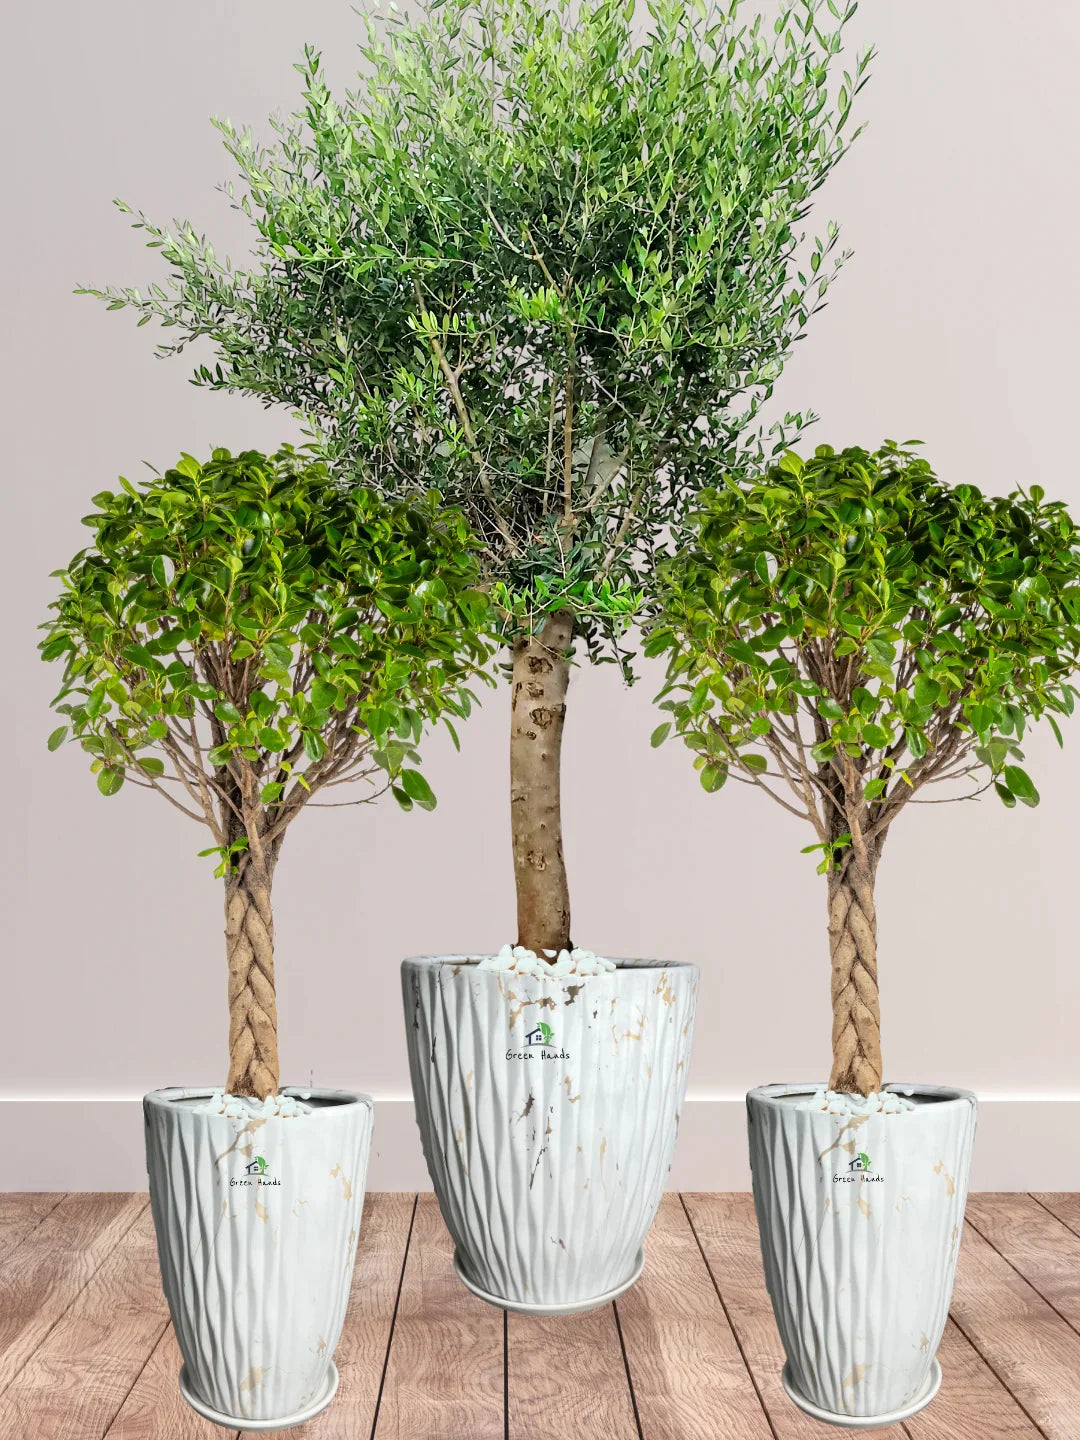 Potted-XL-Mature-Olive-Tree-two-Twisted-Bonsais-Premium-Ceramic-Marble-Gold-Pot